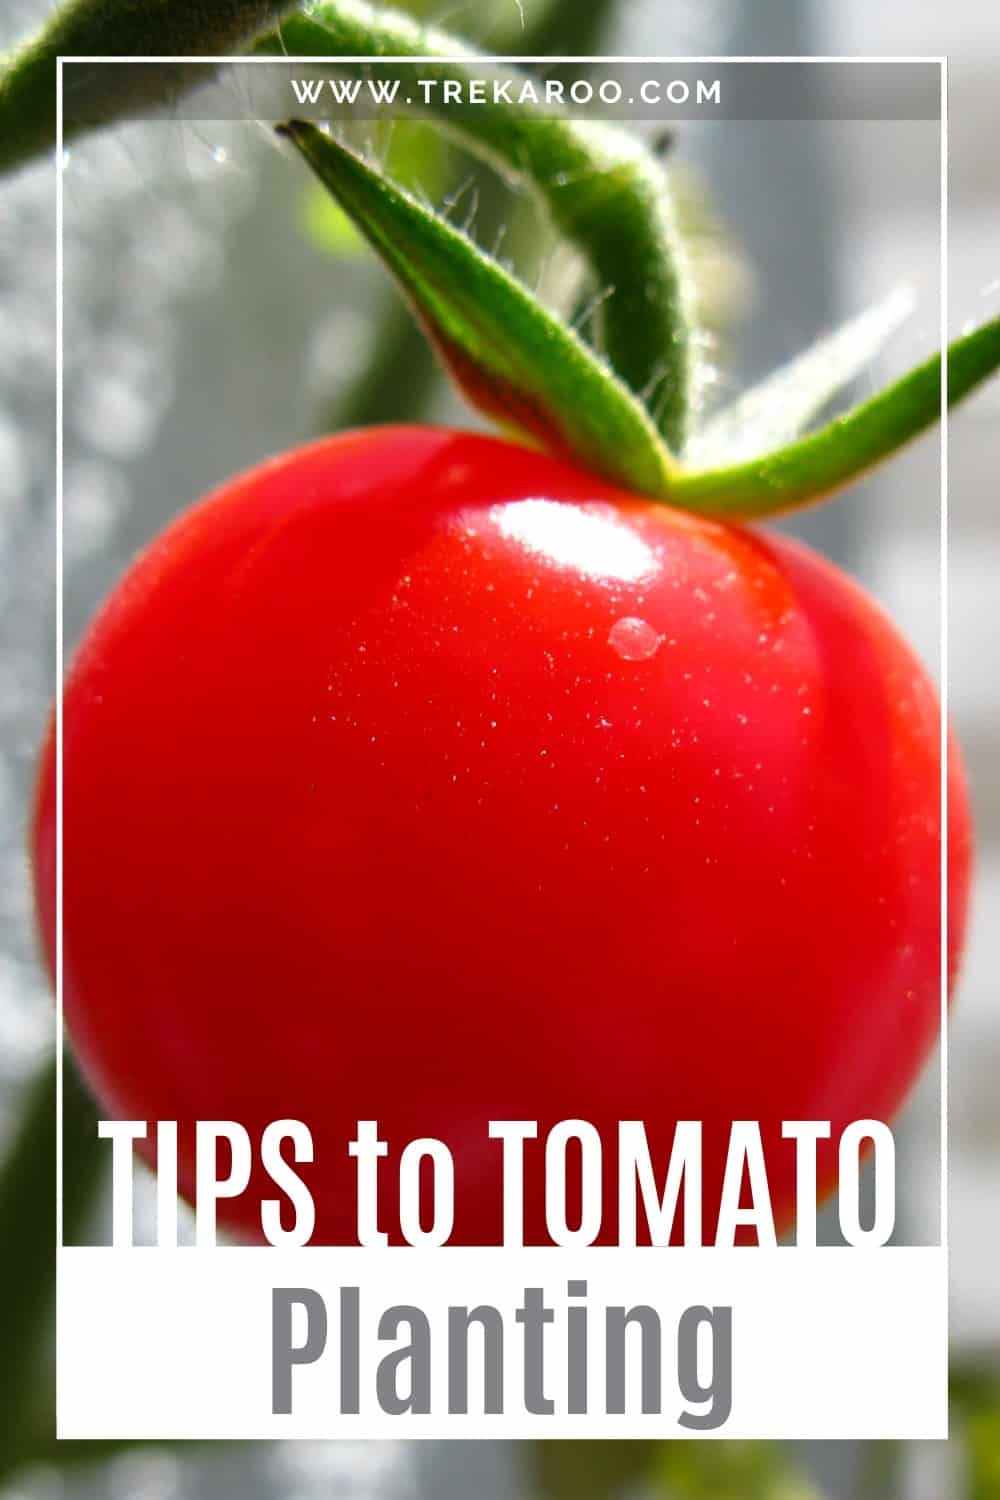 Tomato Planting Tips: 5 Important Questions to Ask Yourself Before ...